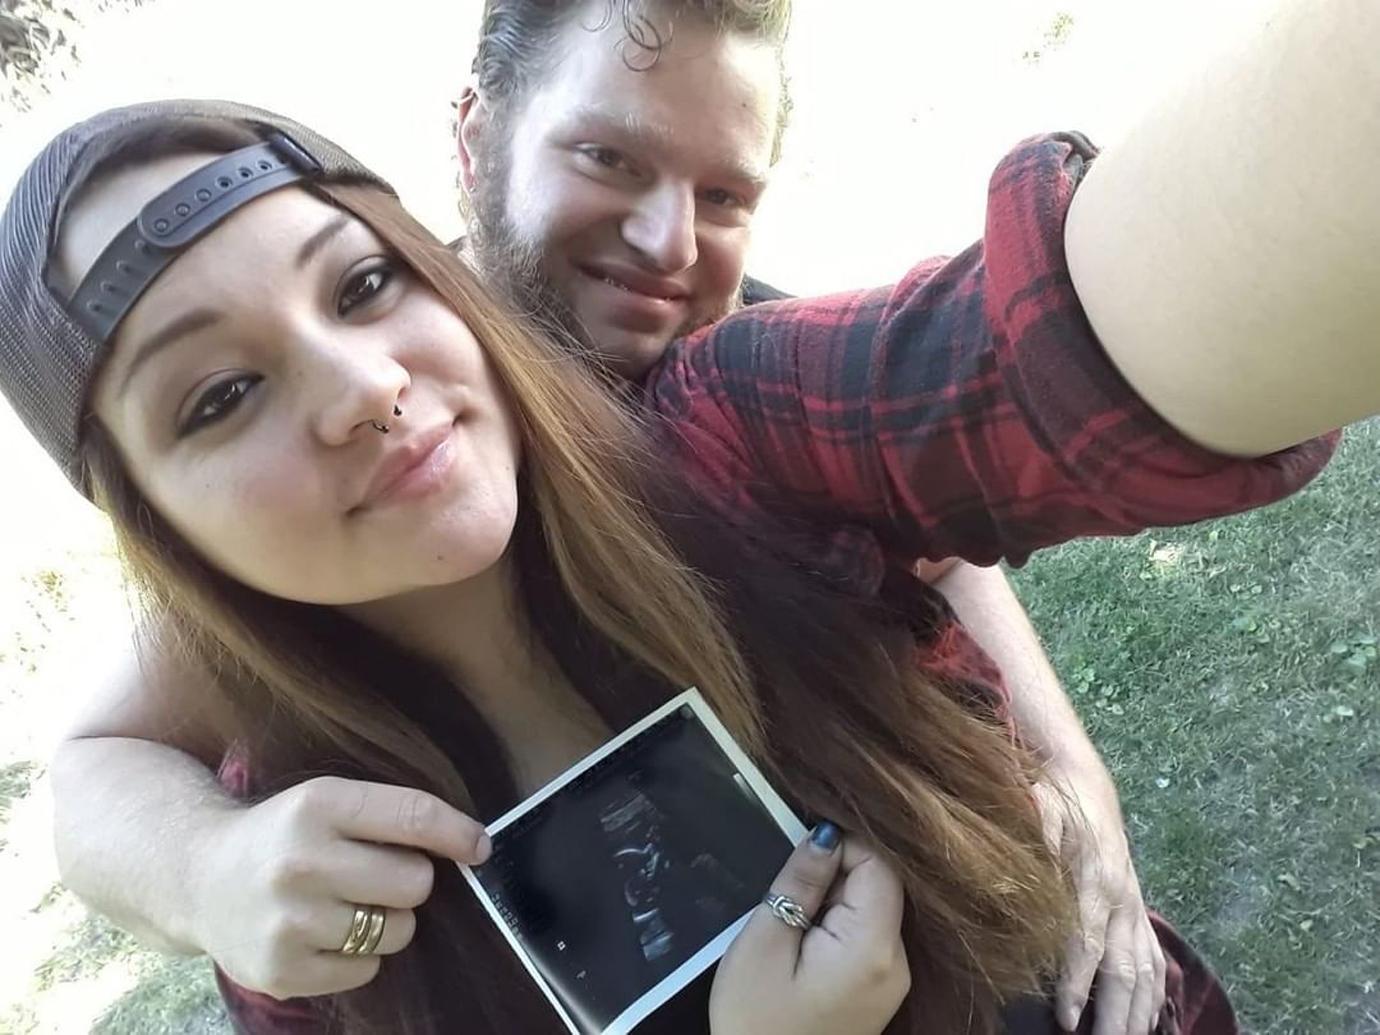 Gabe Brown and Raquel Selfie With Sonogram